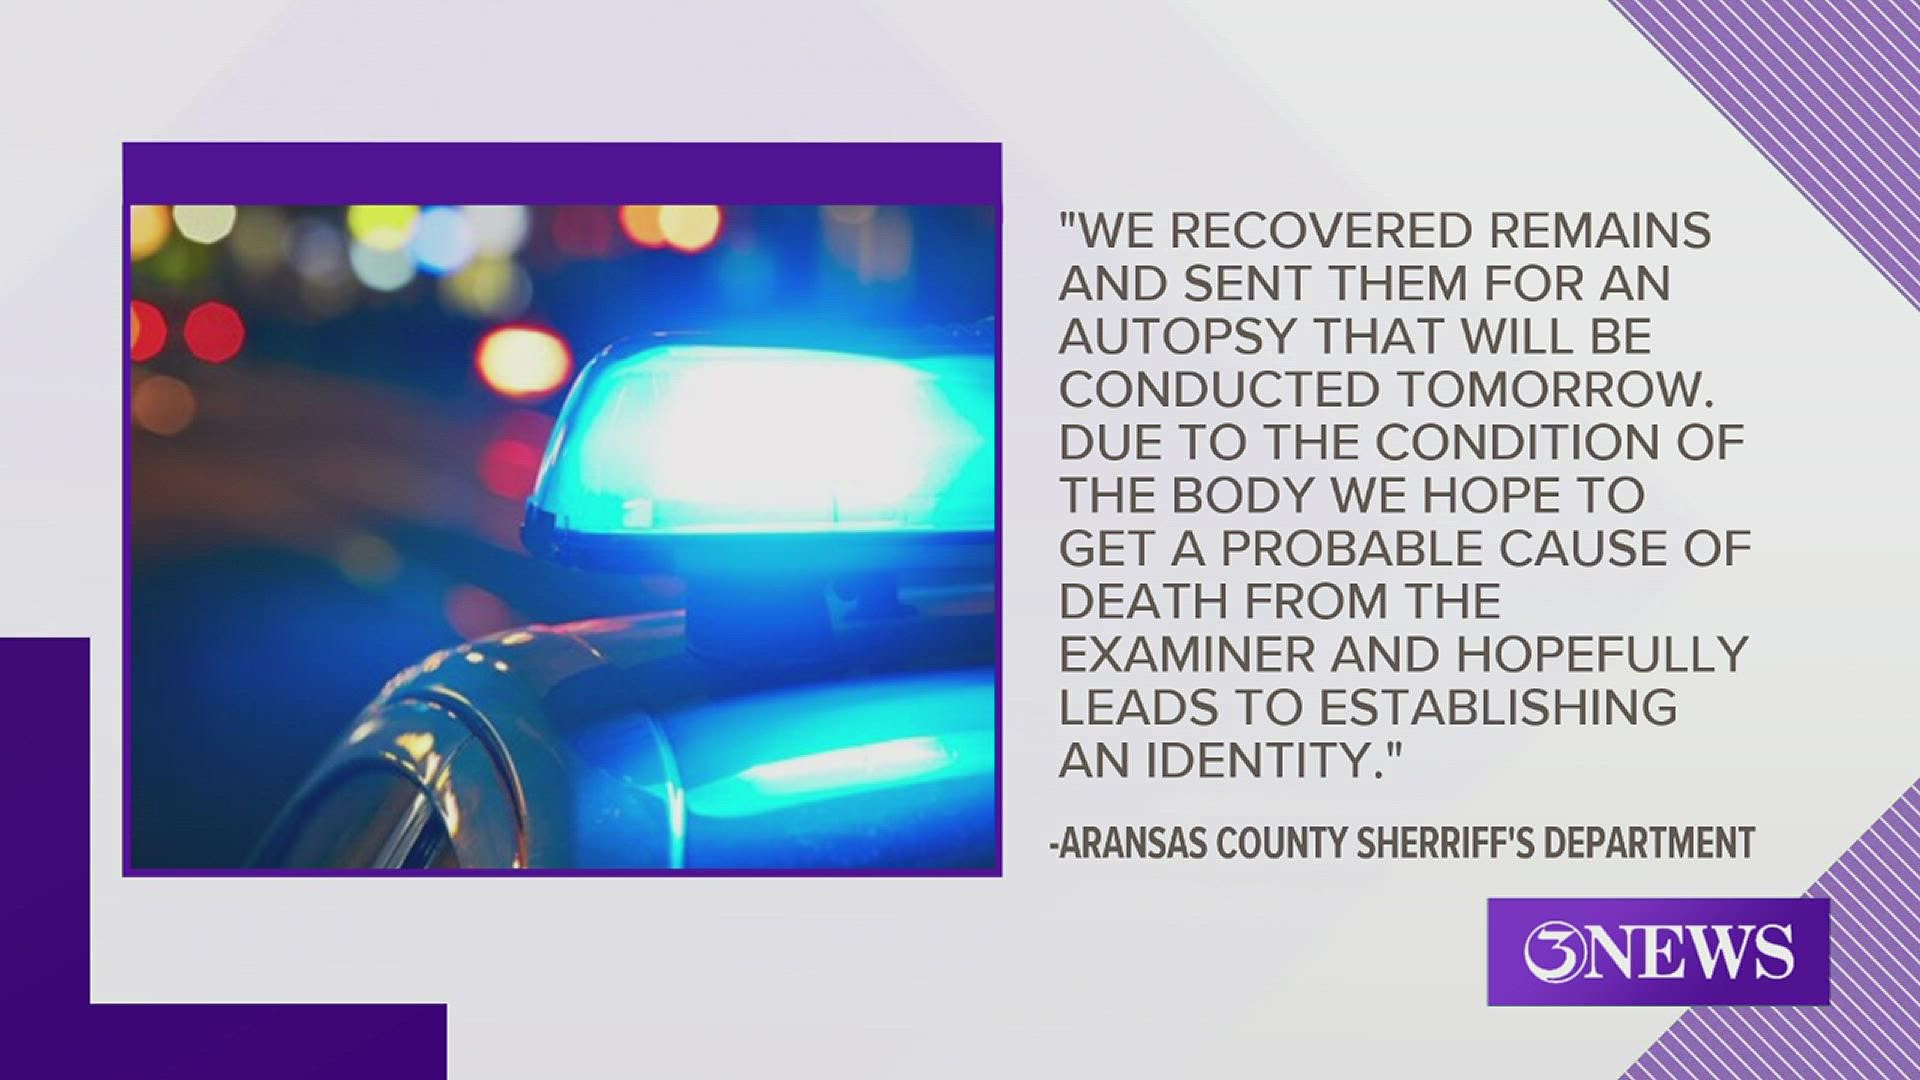 The department said their hope is to find probable cause of death from an examiner and any evidence that will help lead them in finding an identification.